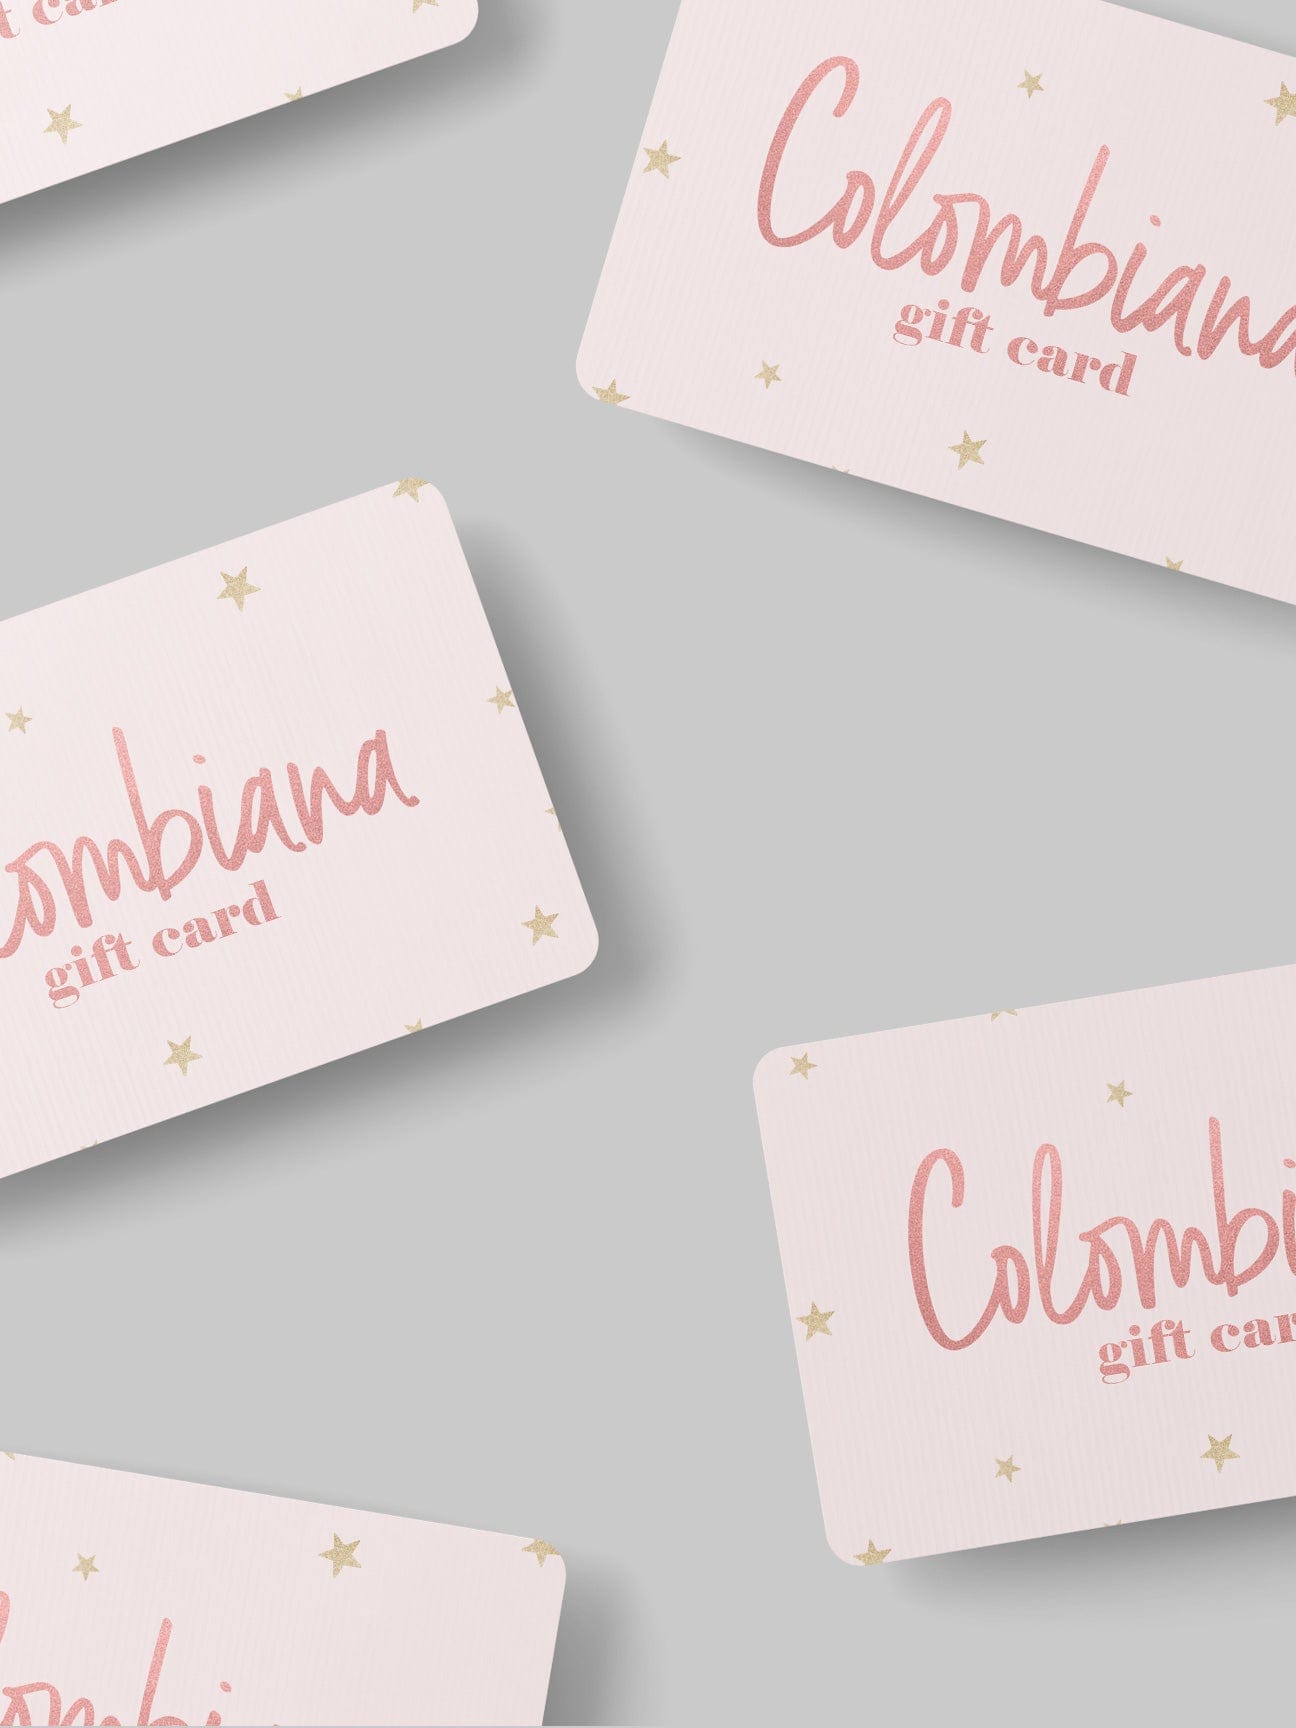 Multiple Colombiana gift card pink